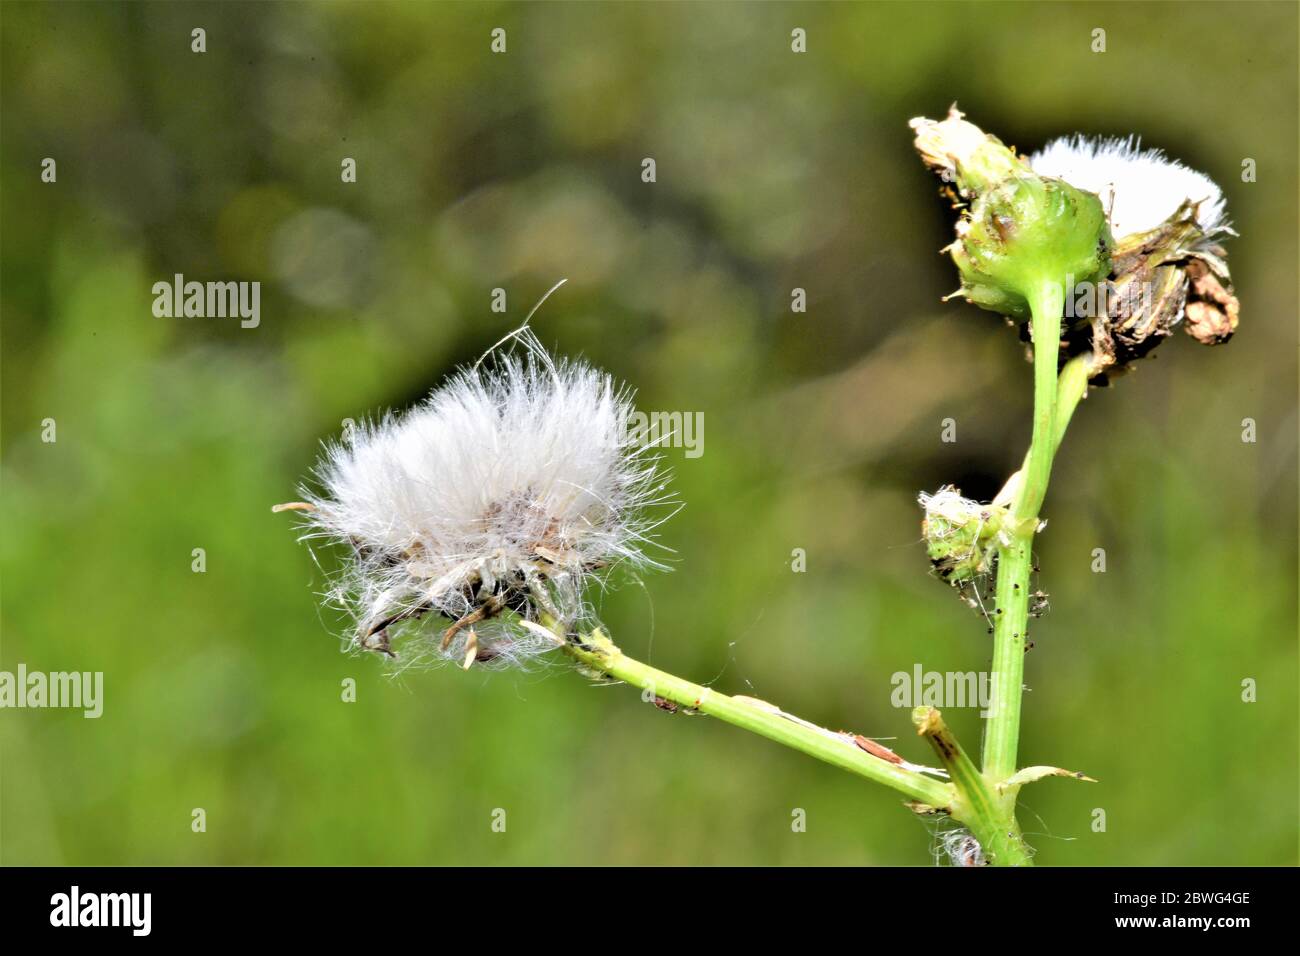 Dandelions gone to seed. Stock Photo